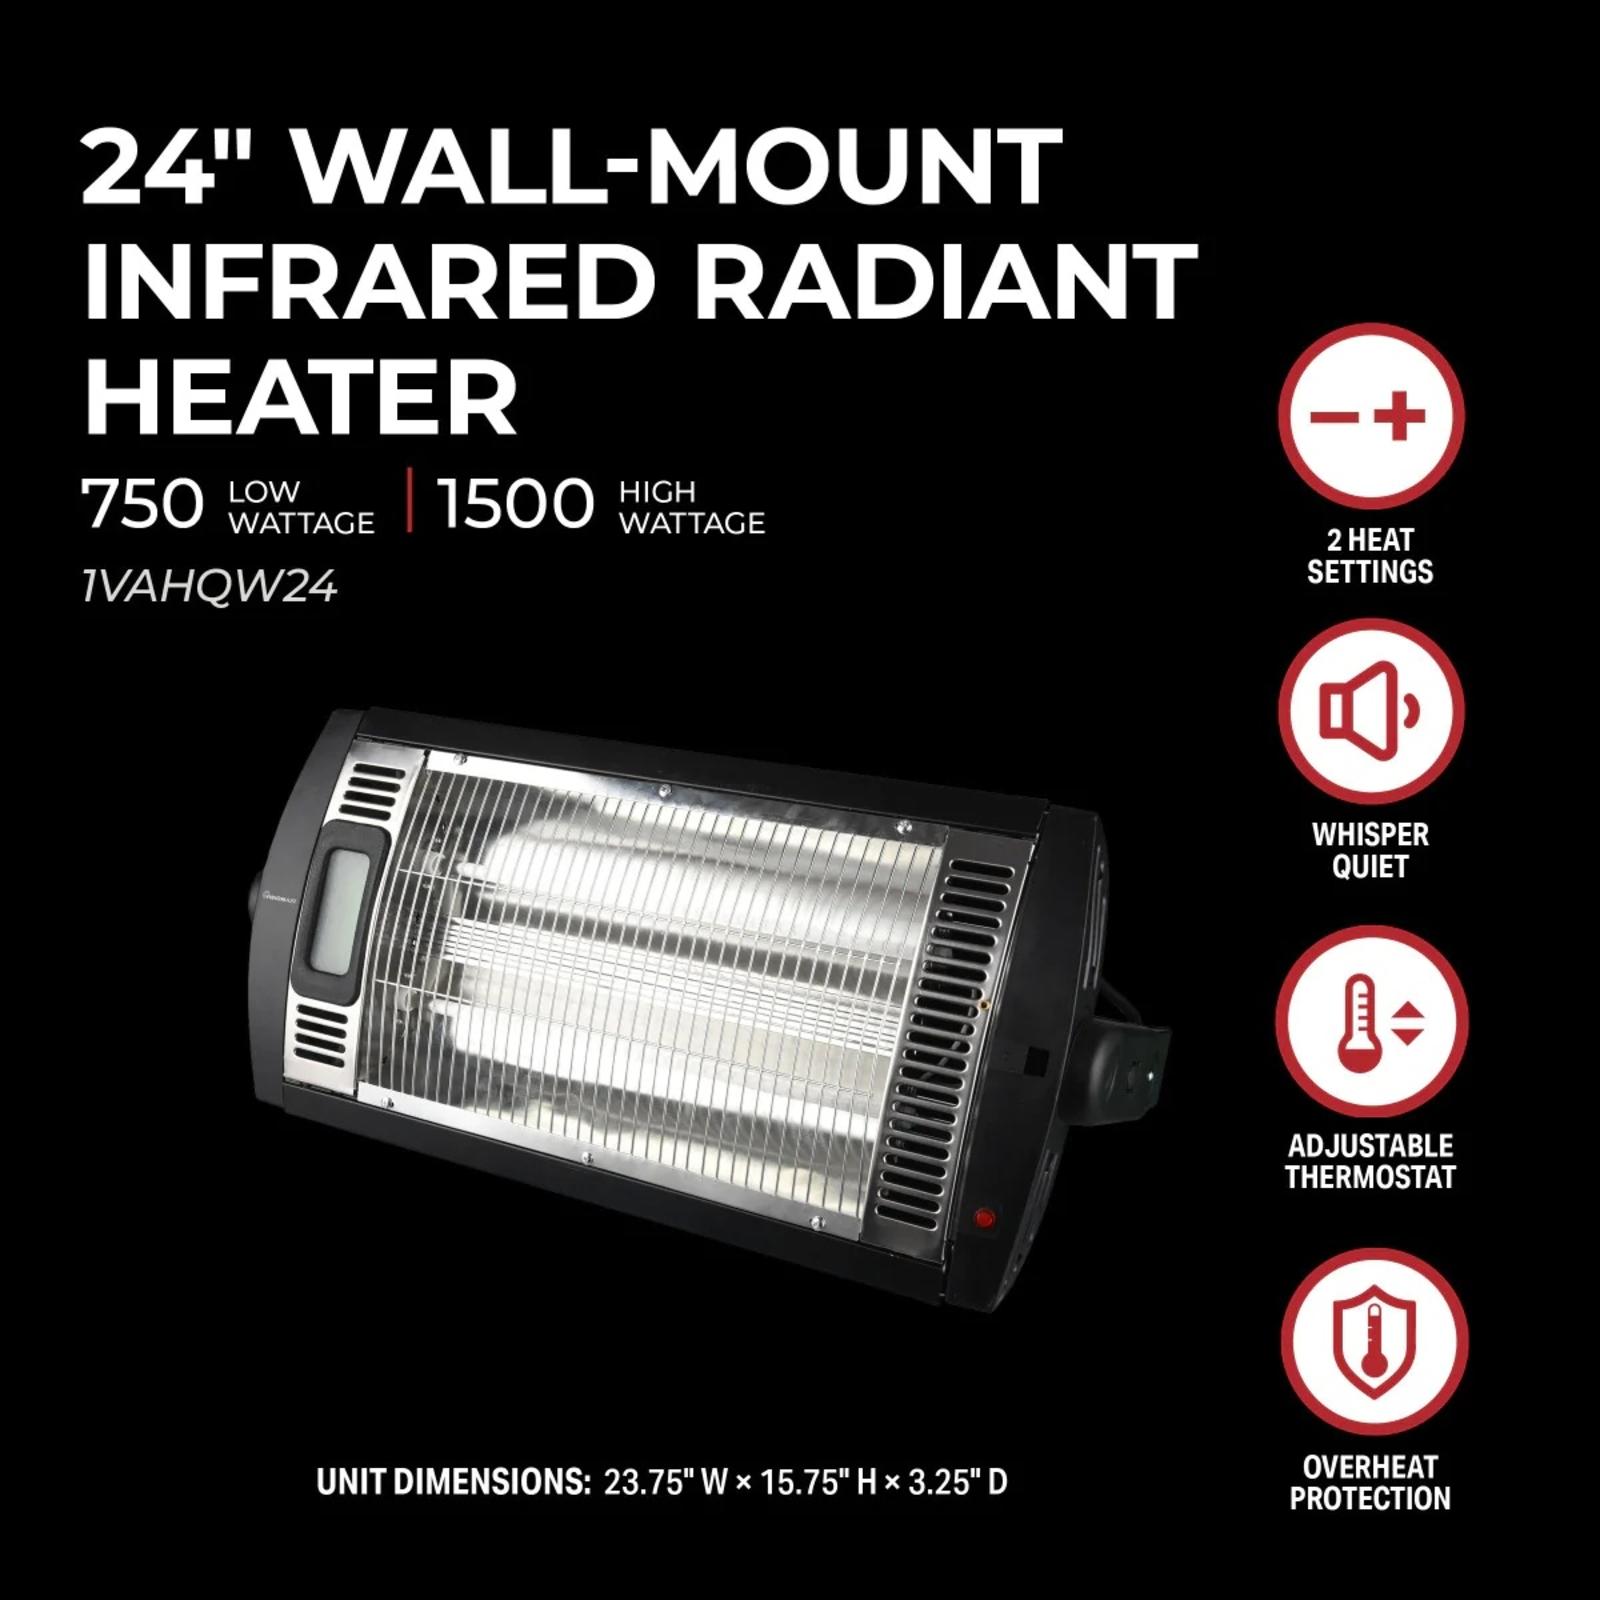 24" wall mount infared radiant